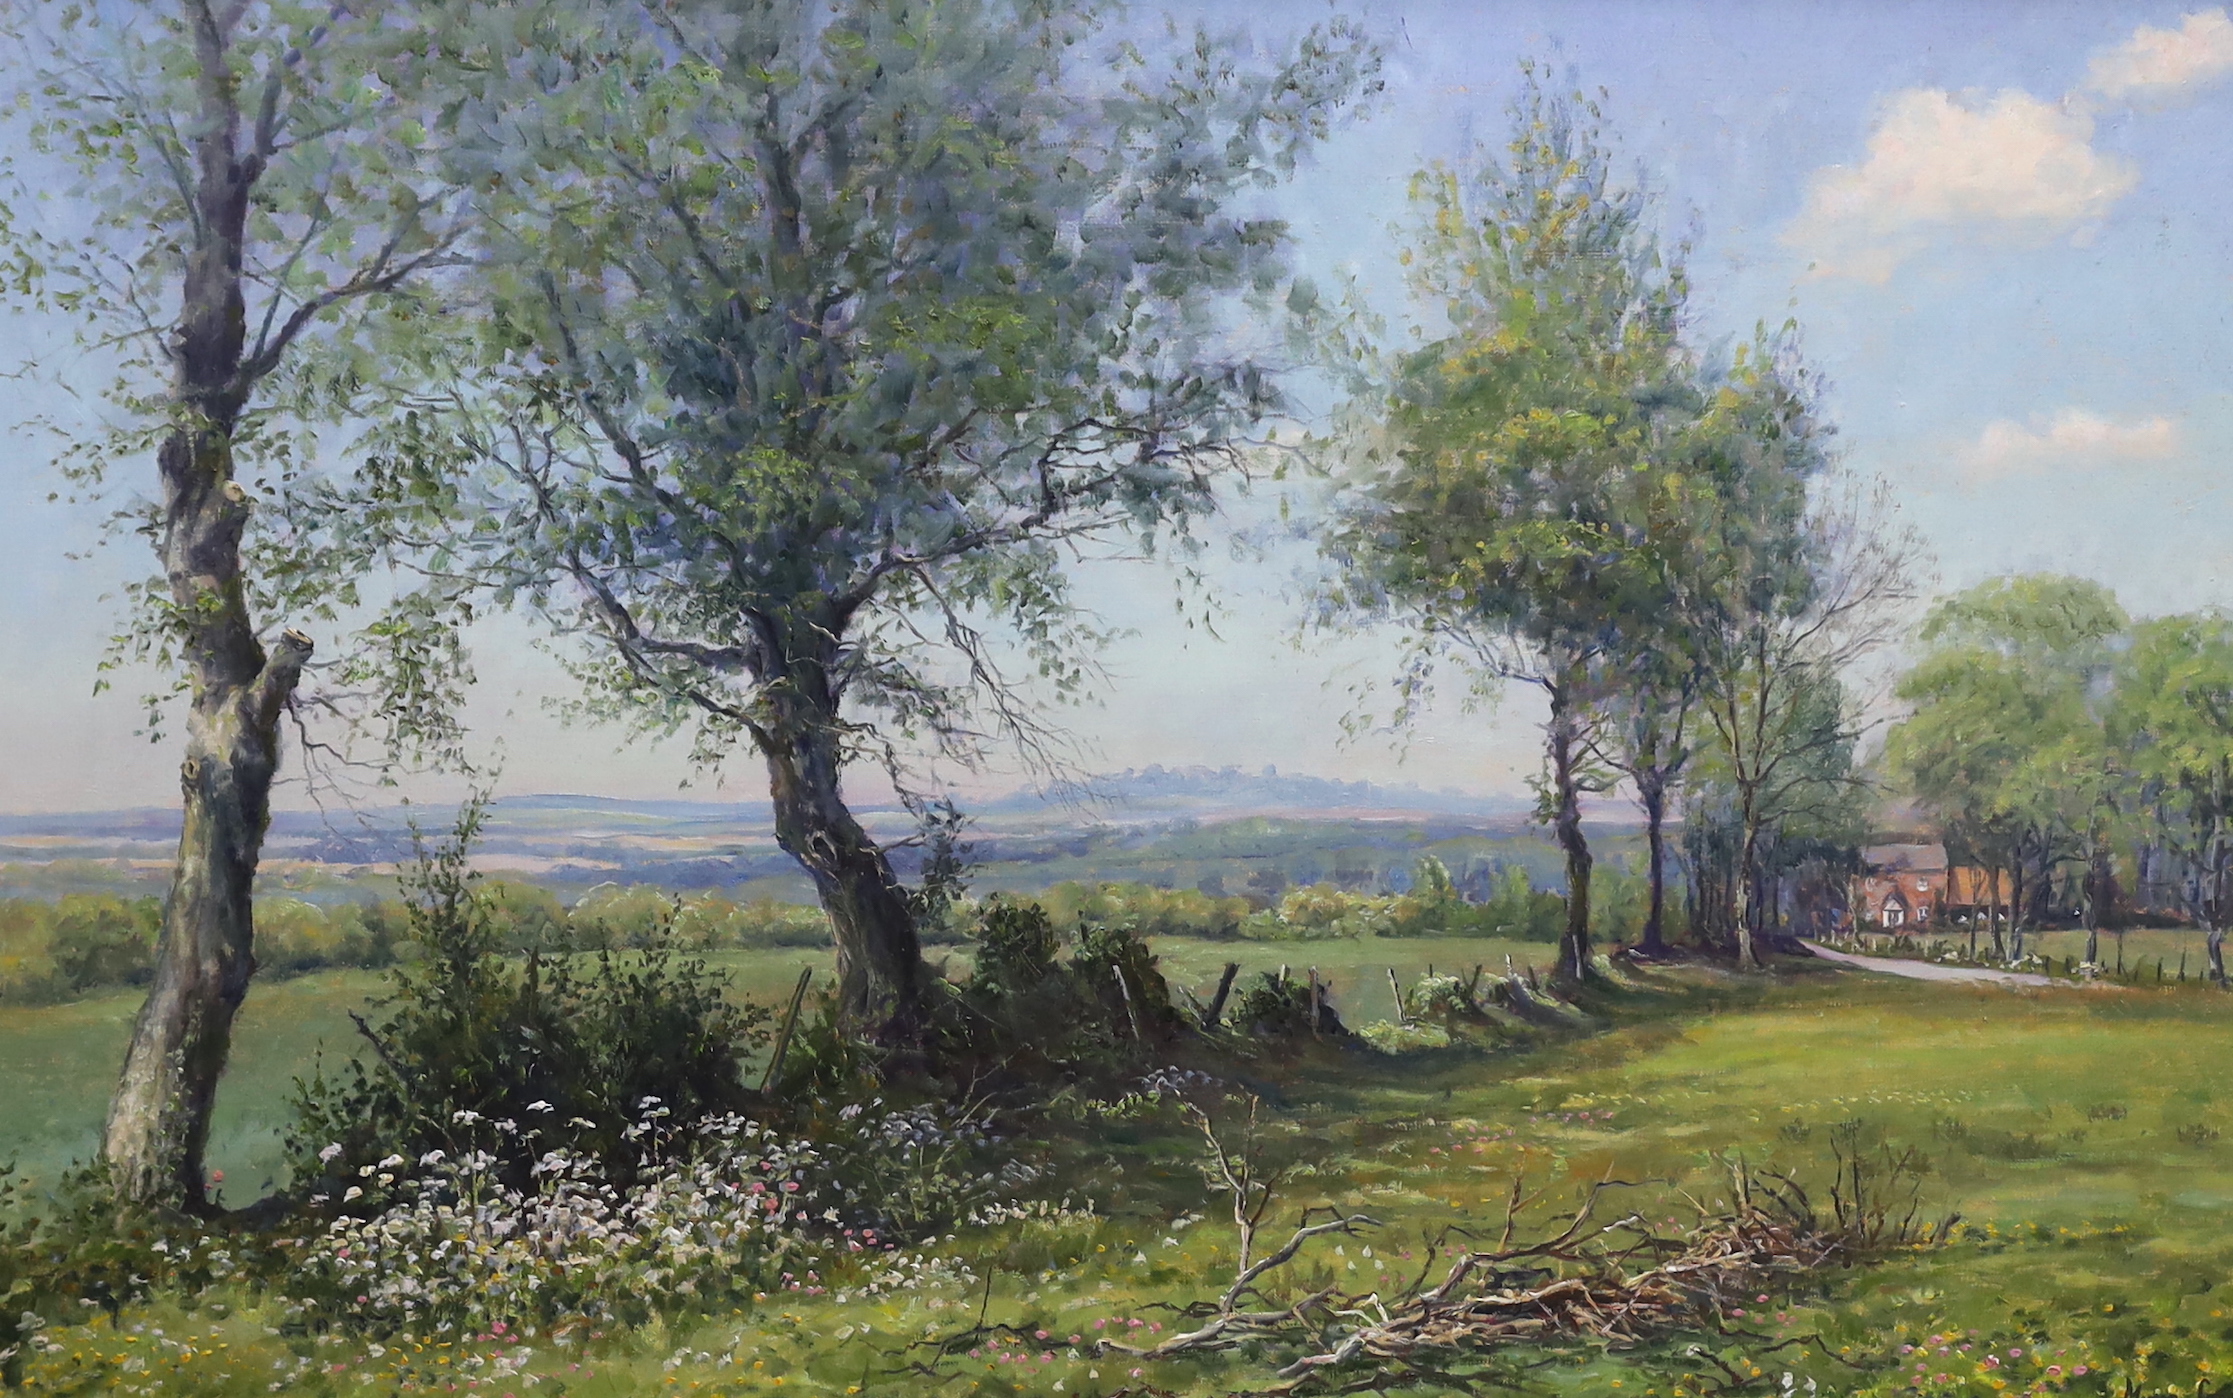 Mervyn Goode (b.1948), oil on canvas, 'Sunshine on the spring flowers', signed and inscribed verso, 50 x 80cm